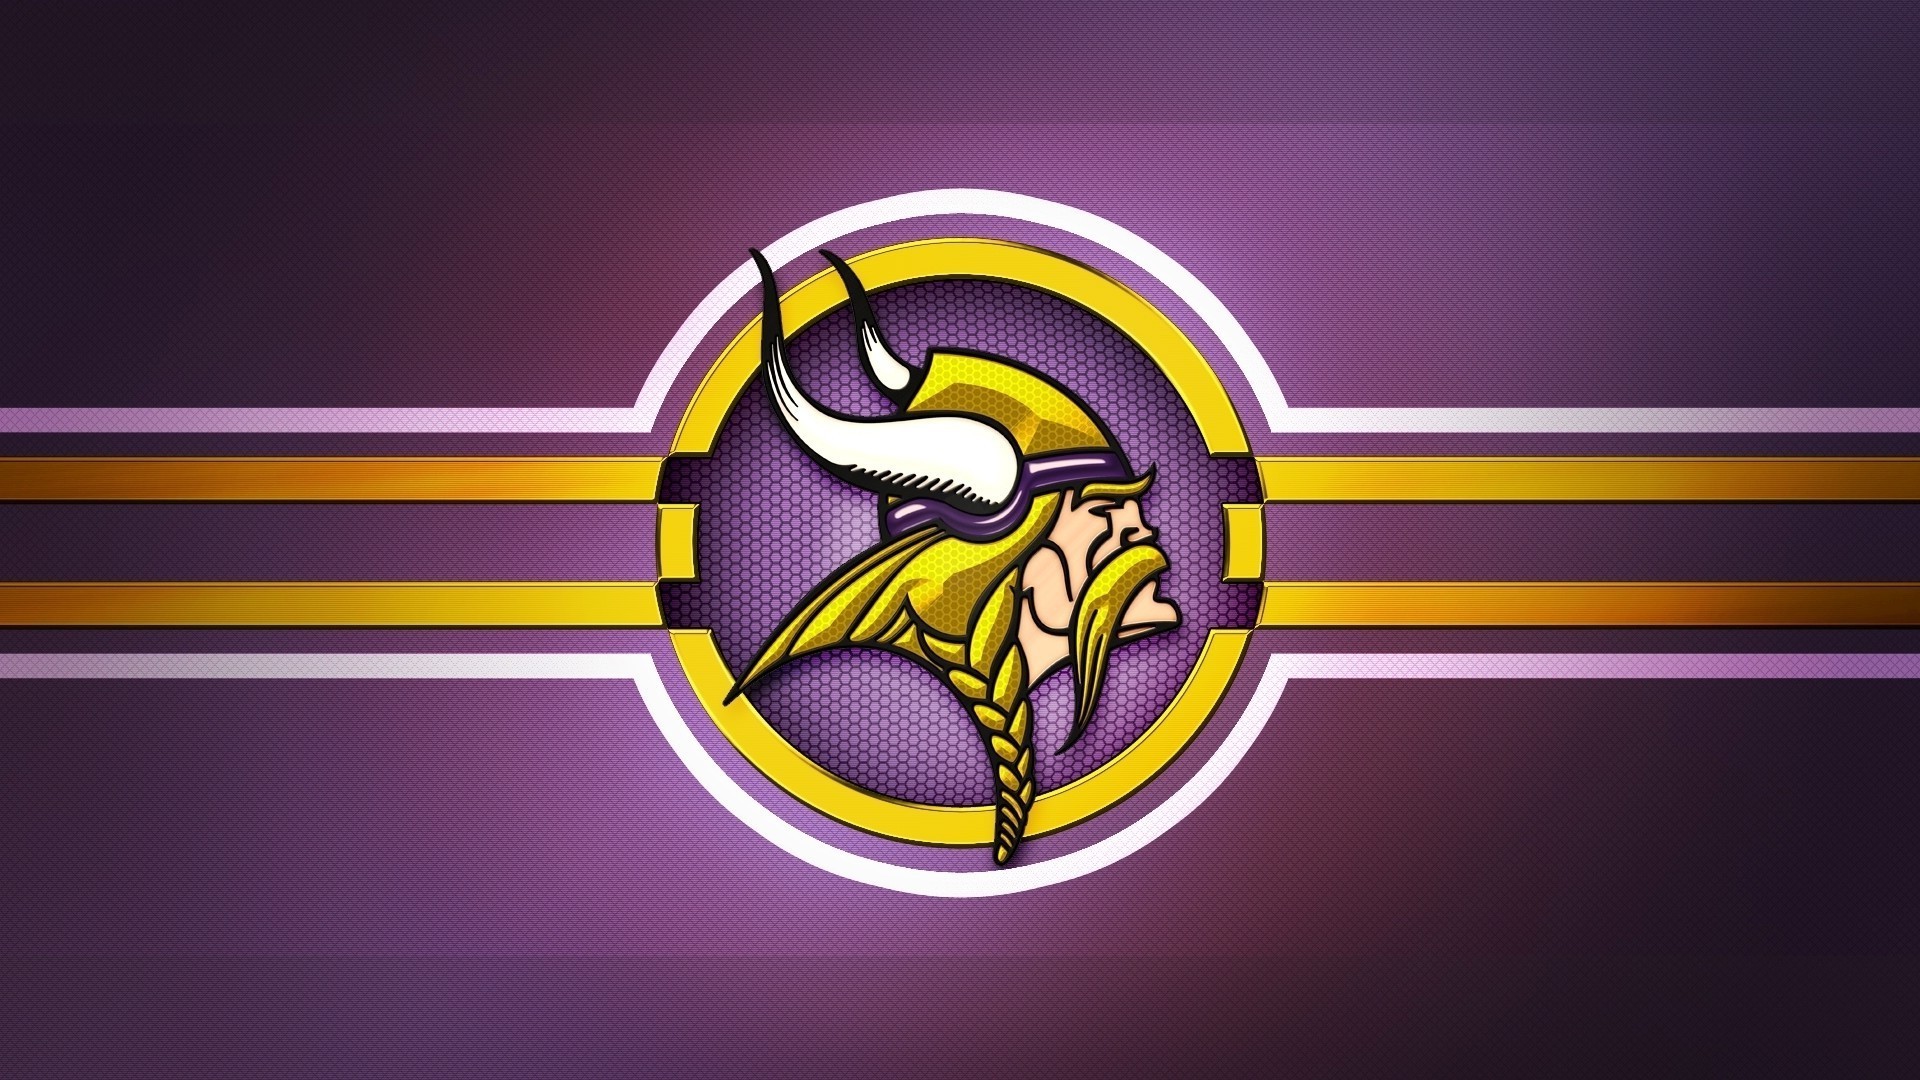 Desktop Wallpapers Minnesota Vikings With high-resolution 1920X1080 pixel. Download and set as wallpaper for Desktop Computer, Apple iPhone X, XS Max, XR, 8, 7, 6, SE, iPad, Android